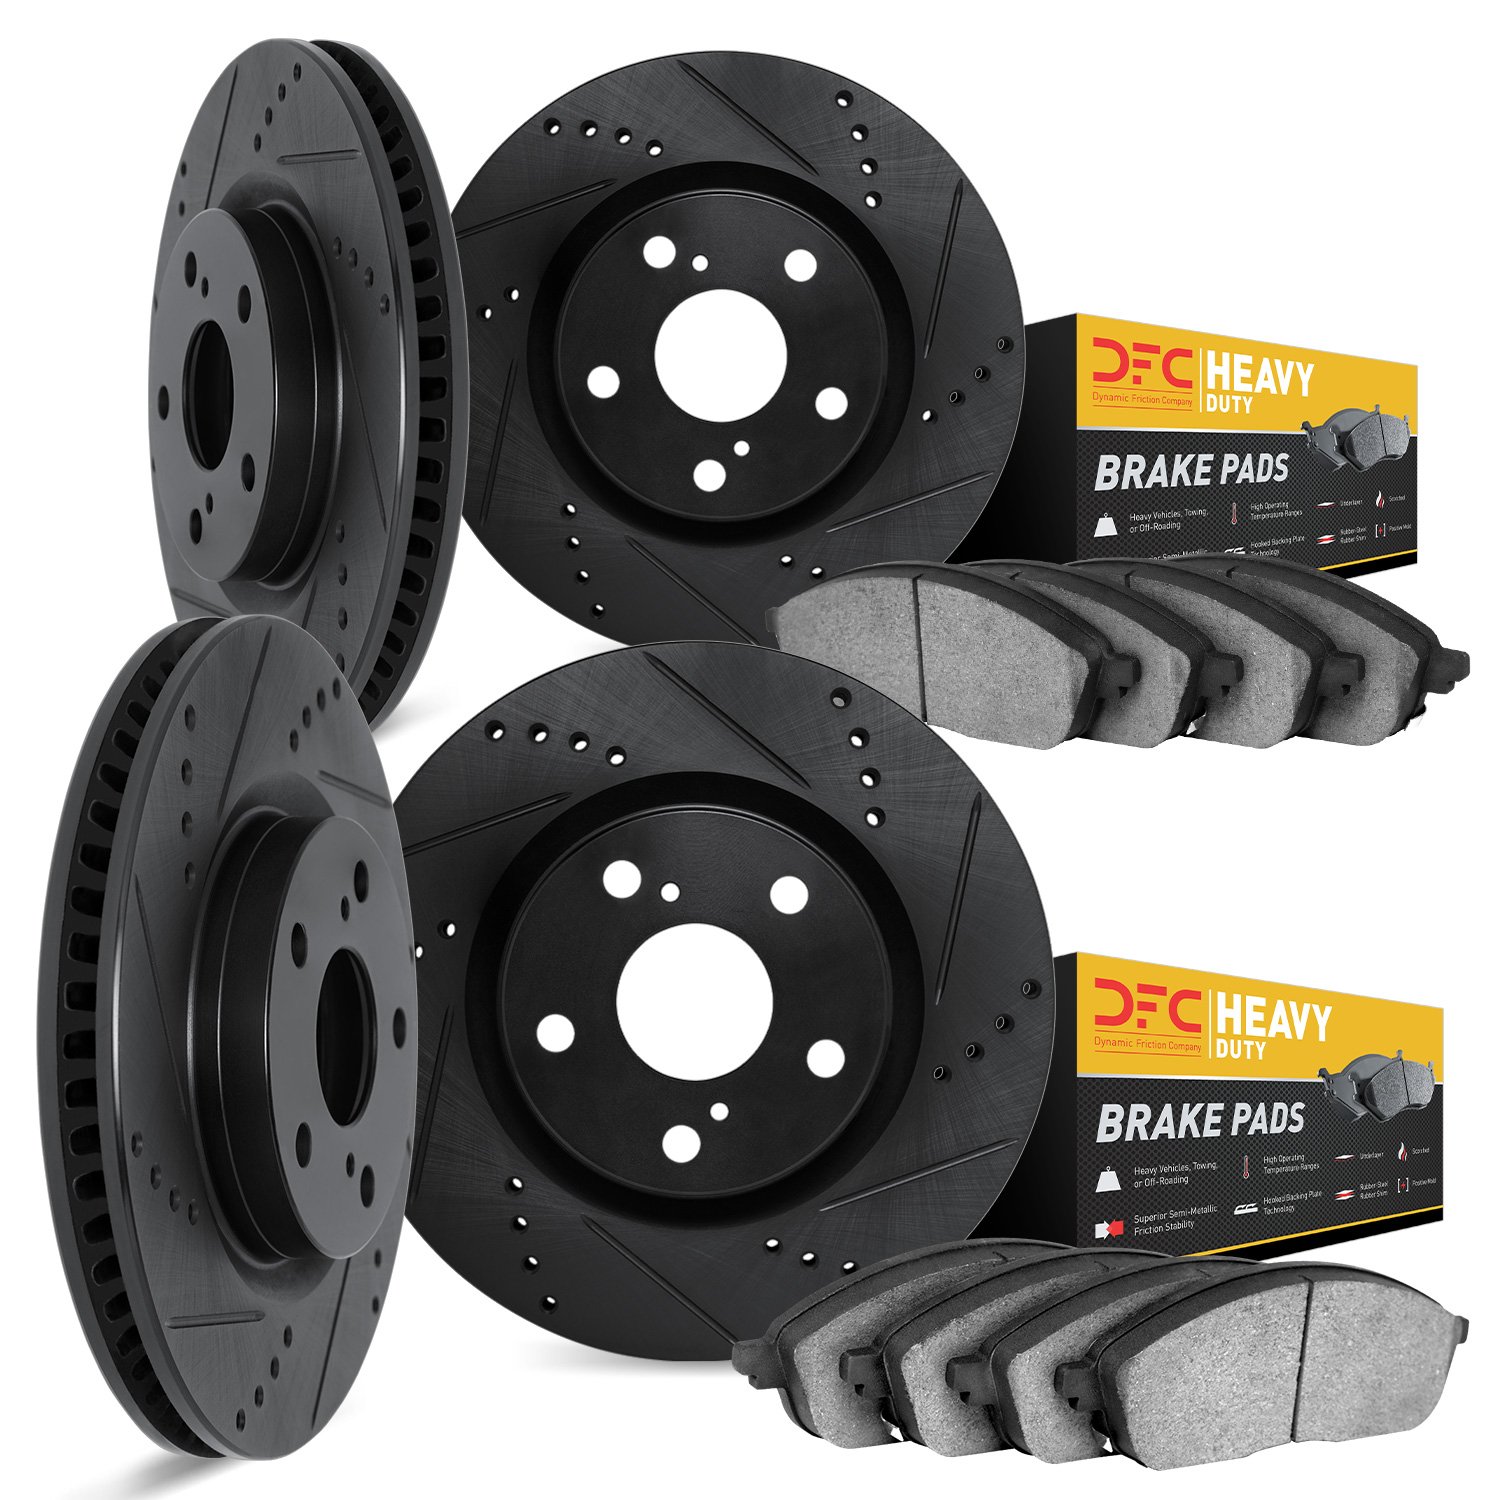 8204-42011 Drilled/Slotted Rotors w/Heavy-Duty Brake Pads Kit [Silver], Fits Select Mopar, Position: Front and Rear